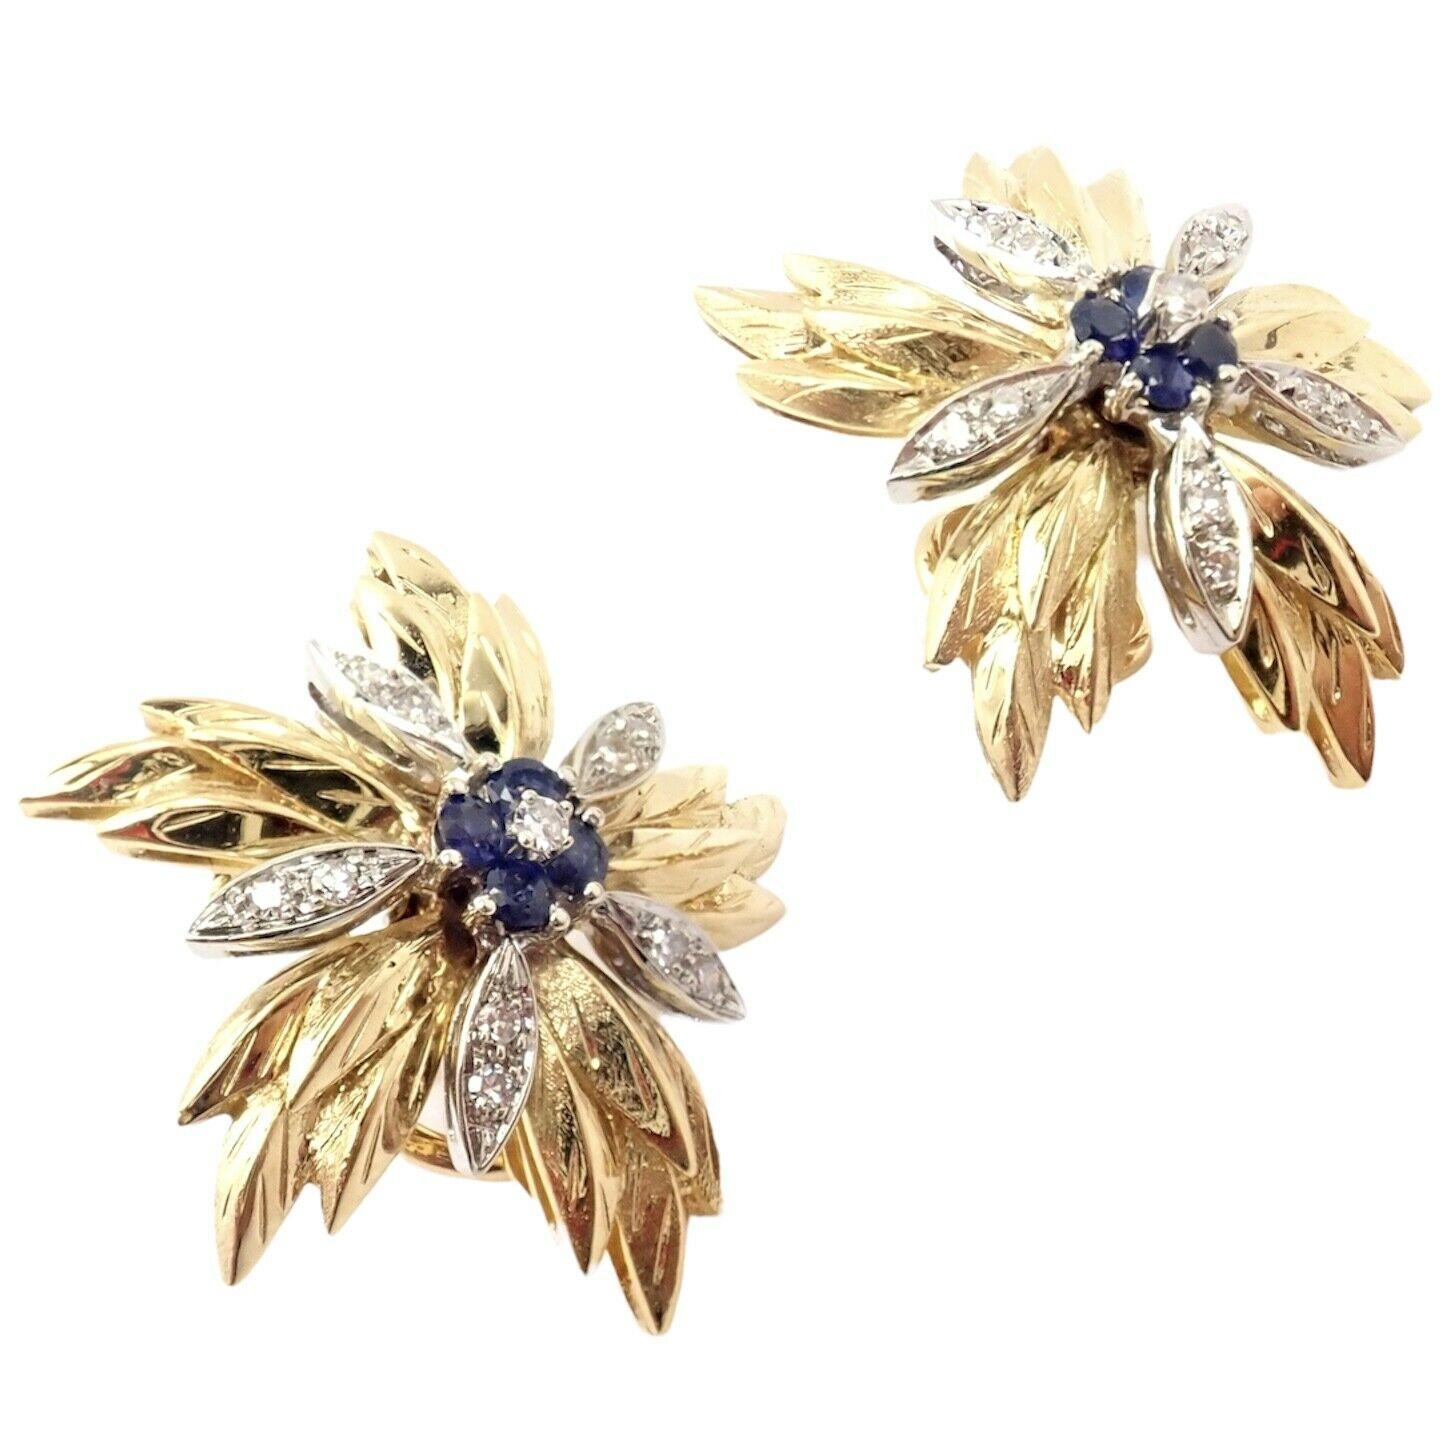 18k Yellow Gold Vintage Diamond And Sapphire Flower Earrings by Tiffany & Co. 
With 22 round brilliant cut diamonds VS1 clarity, G color total weight approximately .22ct
8 sapphire stones 2mm each
These earrings are made for pierced ears.
Details: